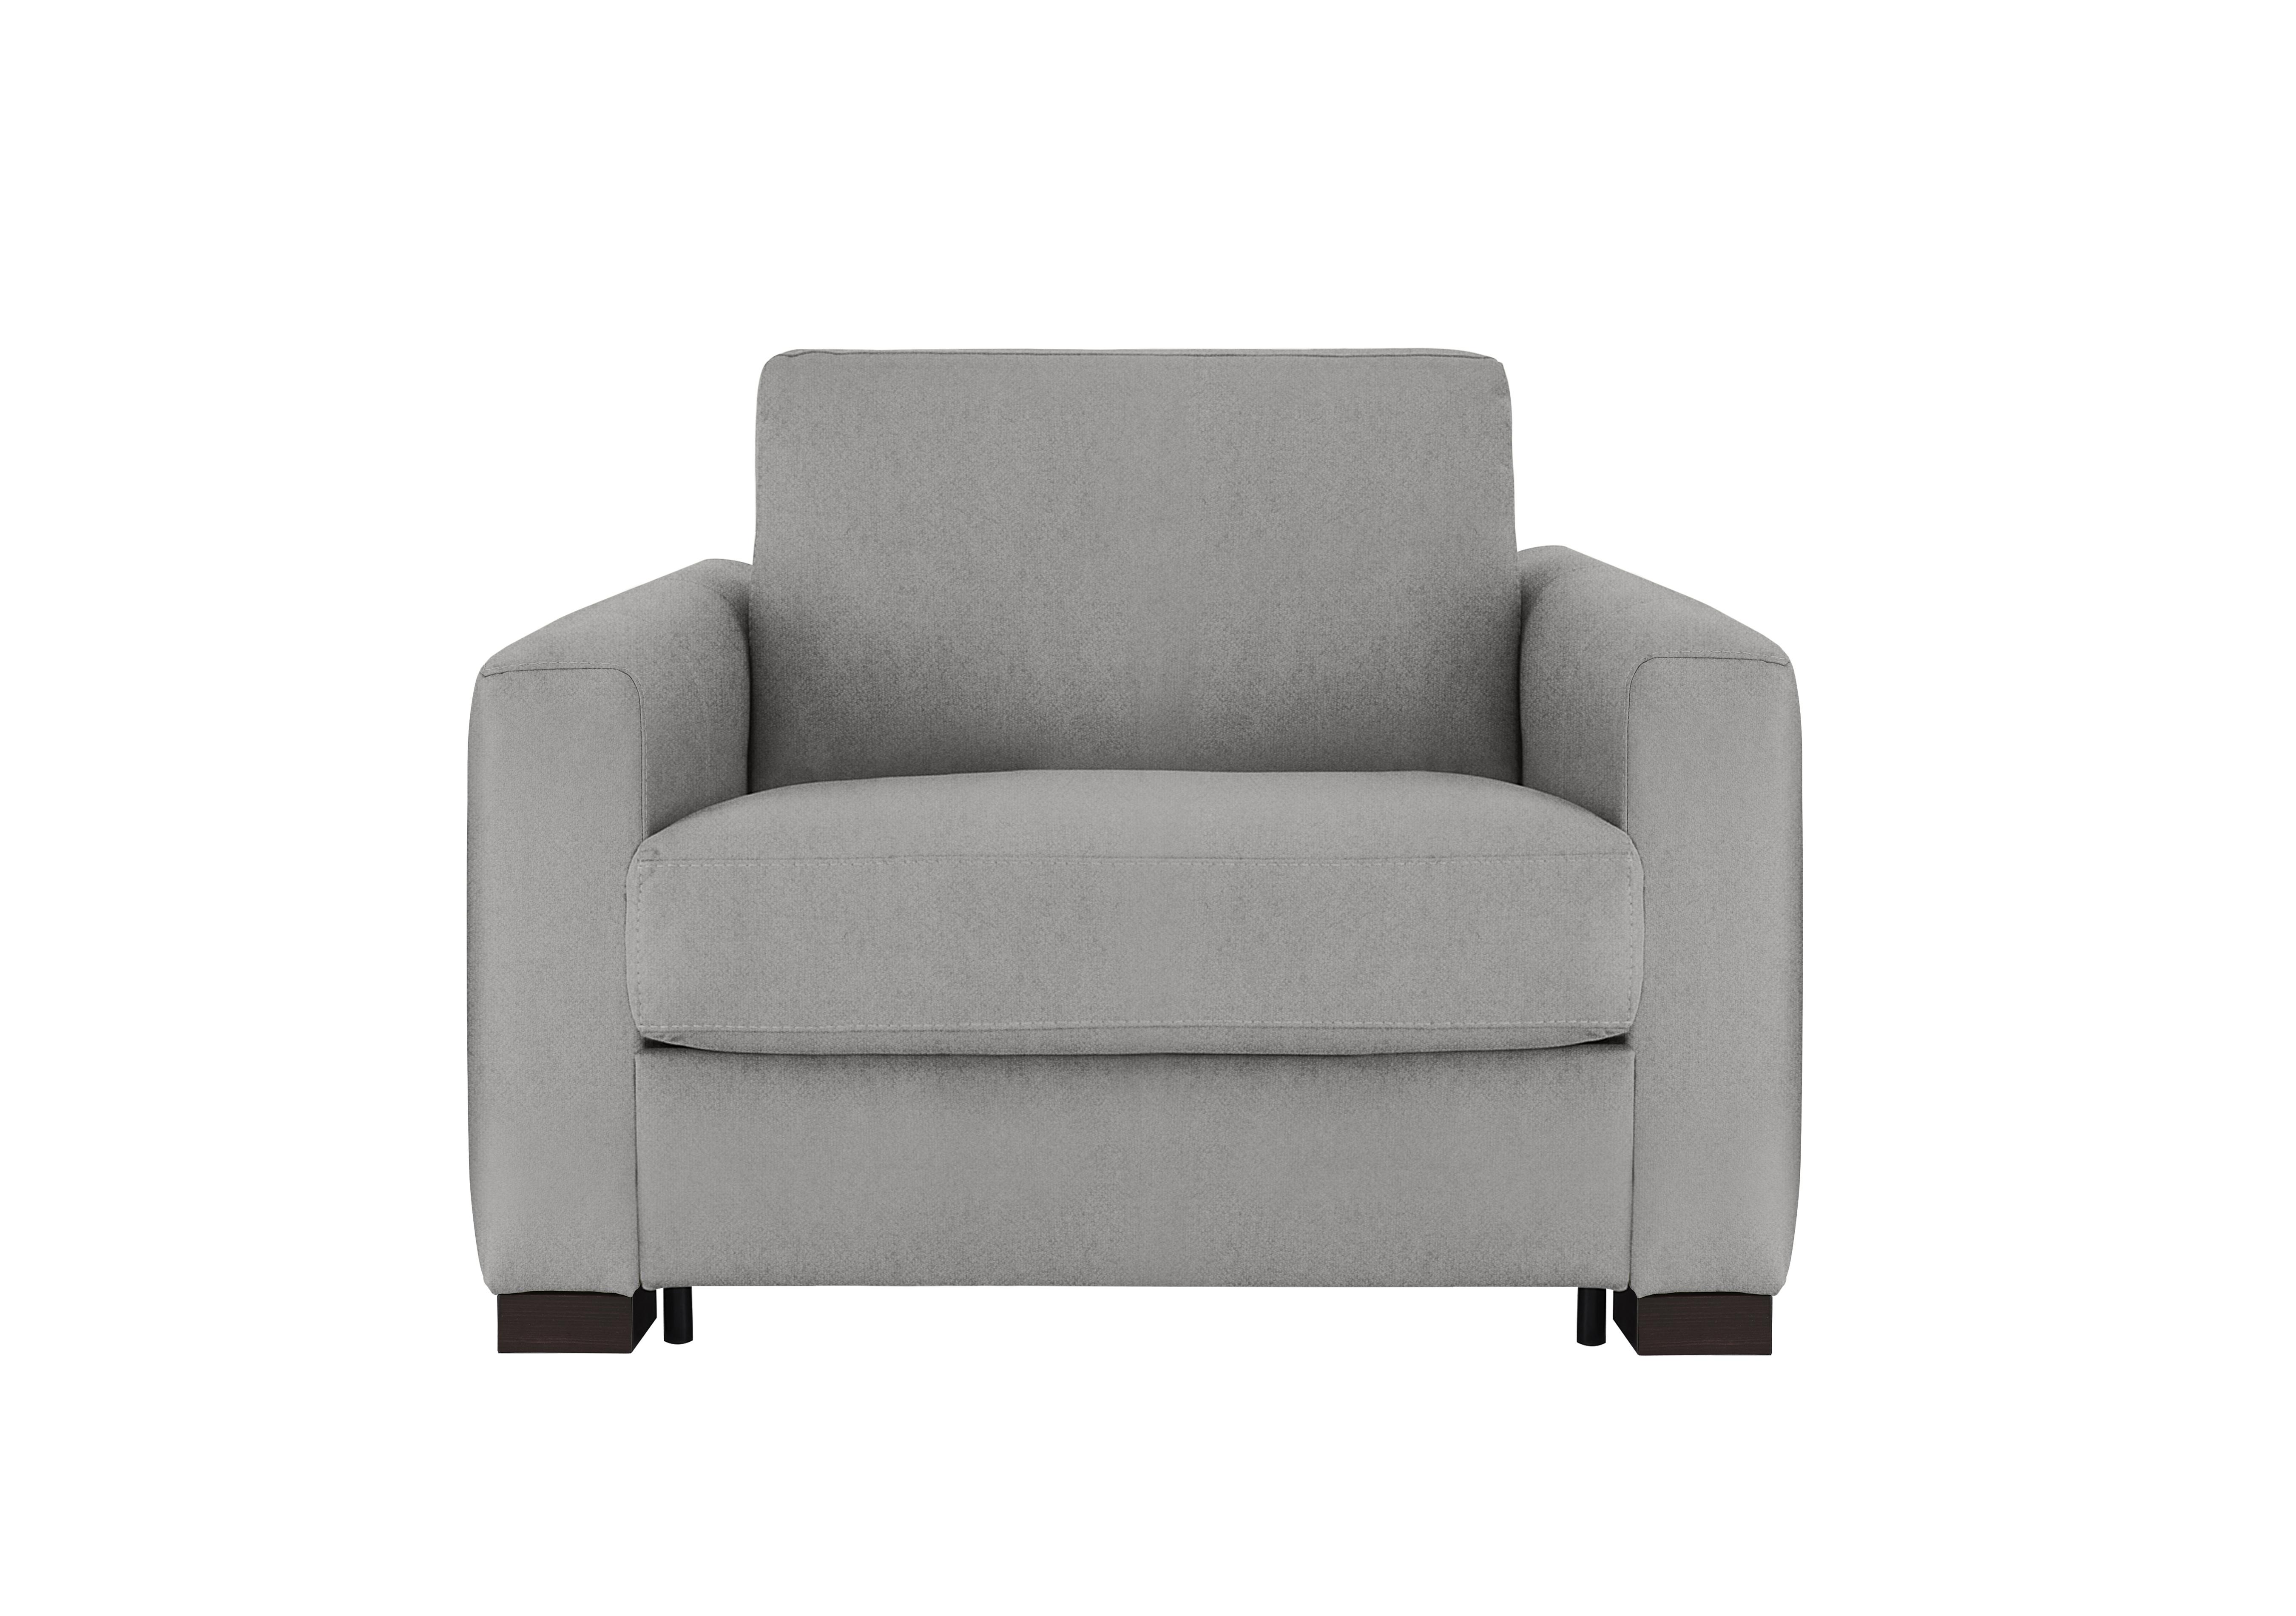 Alcova Fabric Chair Sofa Bed with Box Arms in Fuente Ash on Furniture Village